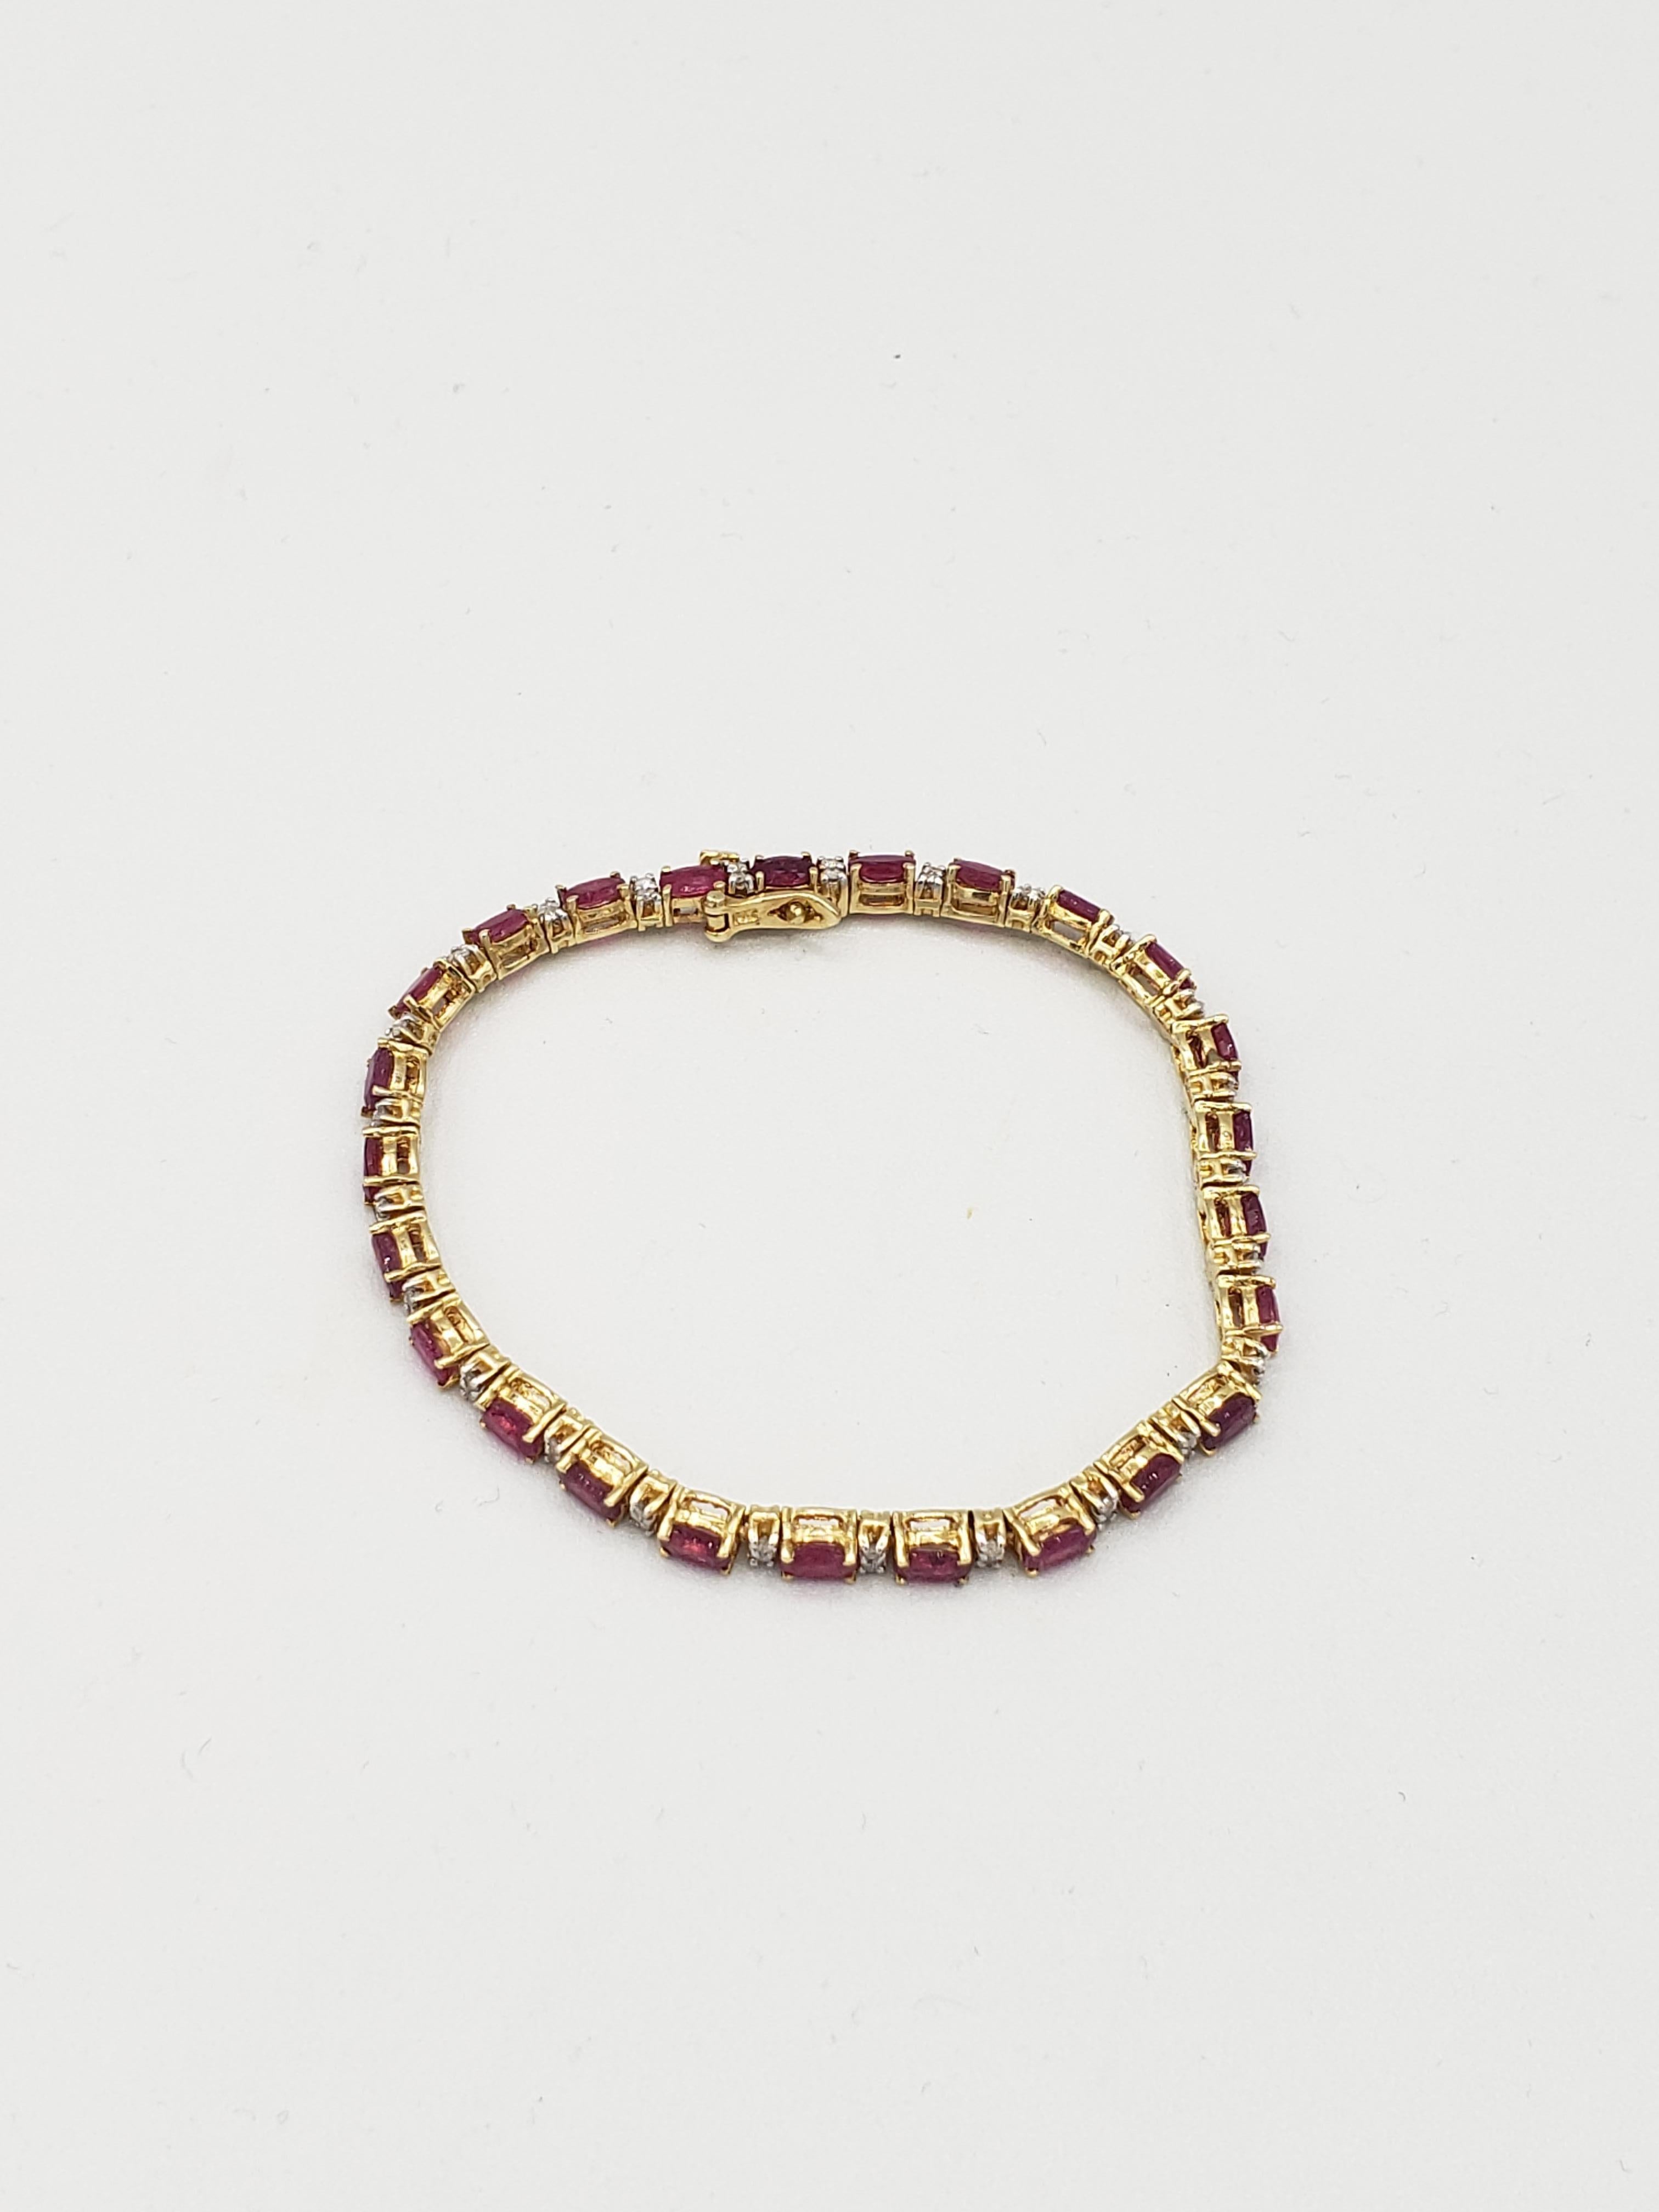 NEW Natural Precious Ruby and Diamond Tennis Bracelet in 14k Solid Yellow Gold For Sale 5